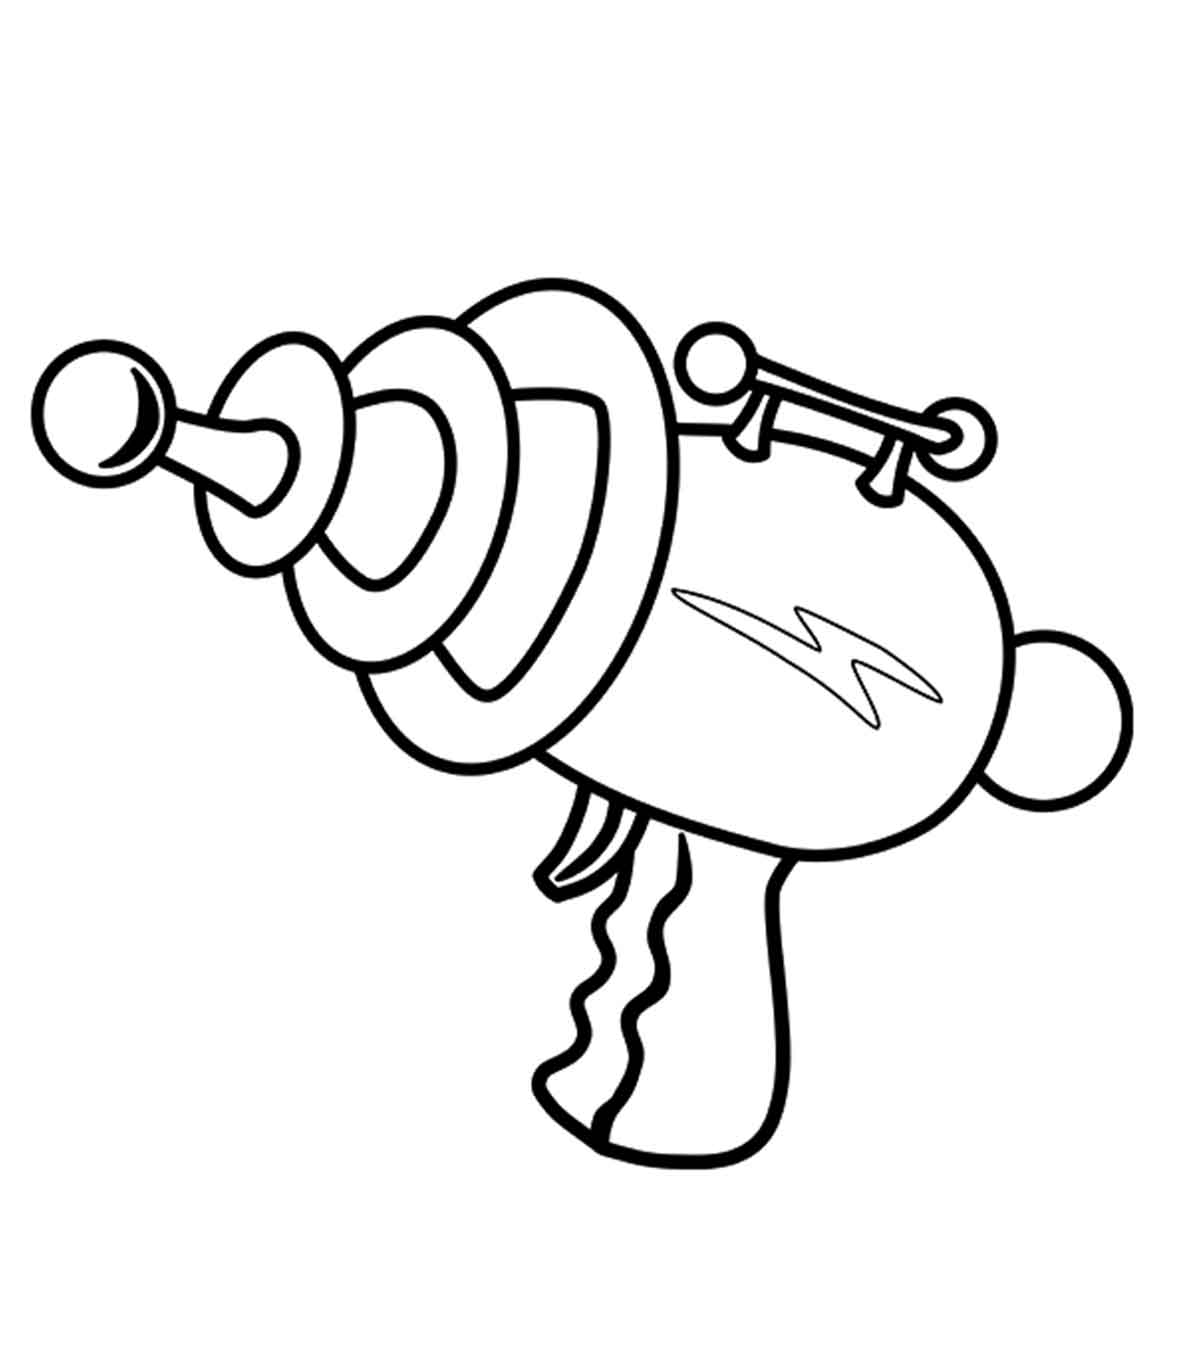 10 Gun Coloring Pages For The Little Adventurer In Your House_image